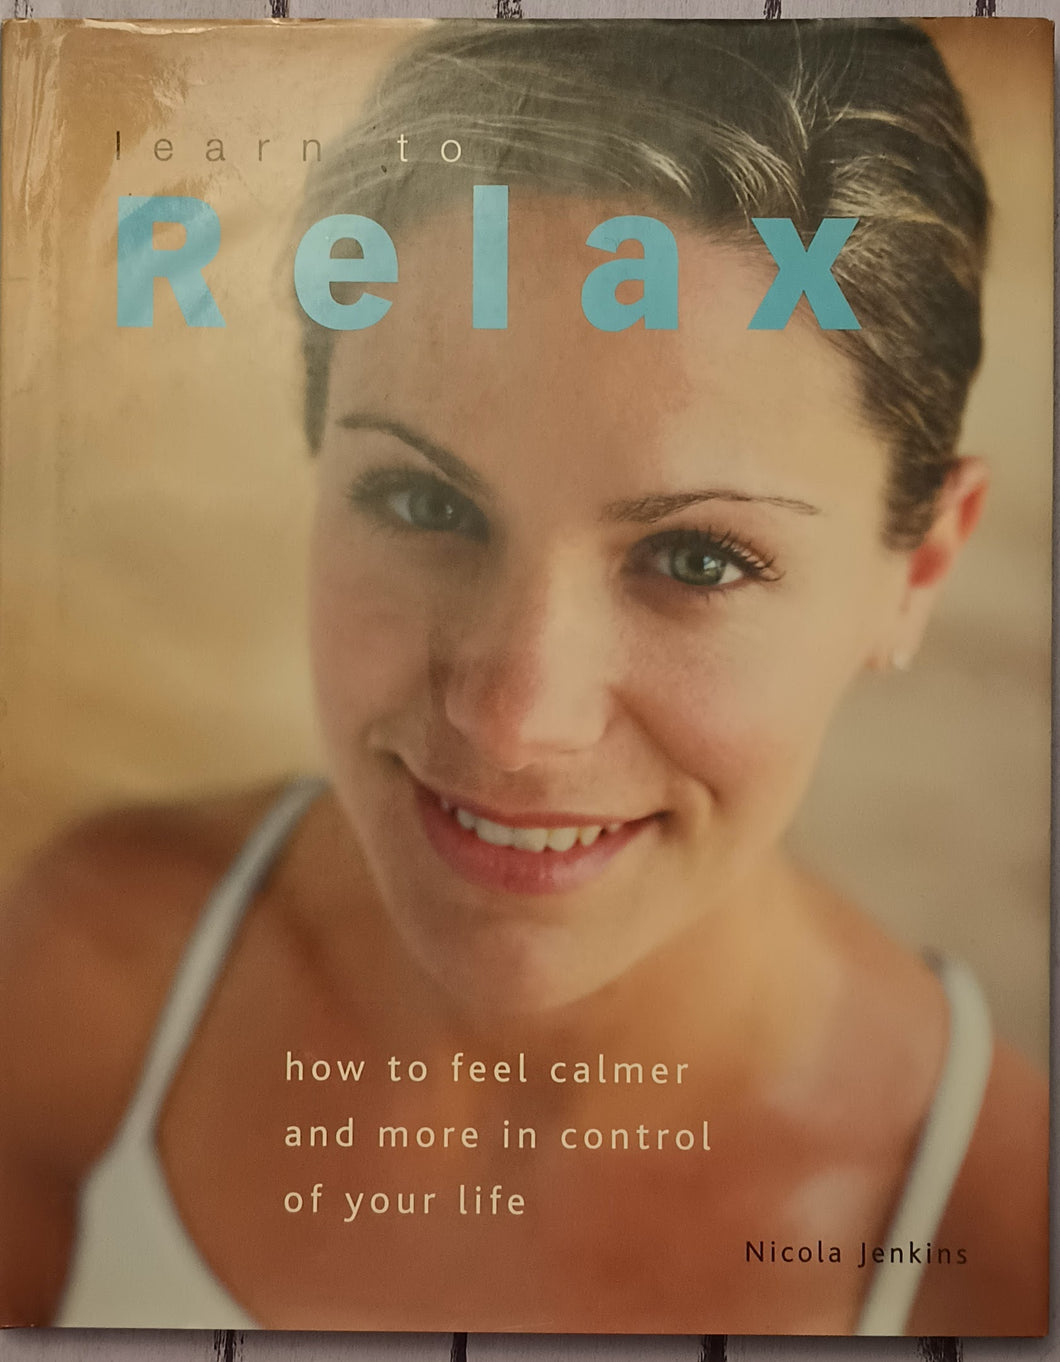 Learn to Relax: How to Feel Calmer and More in Control of Your Life